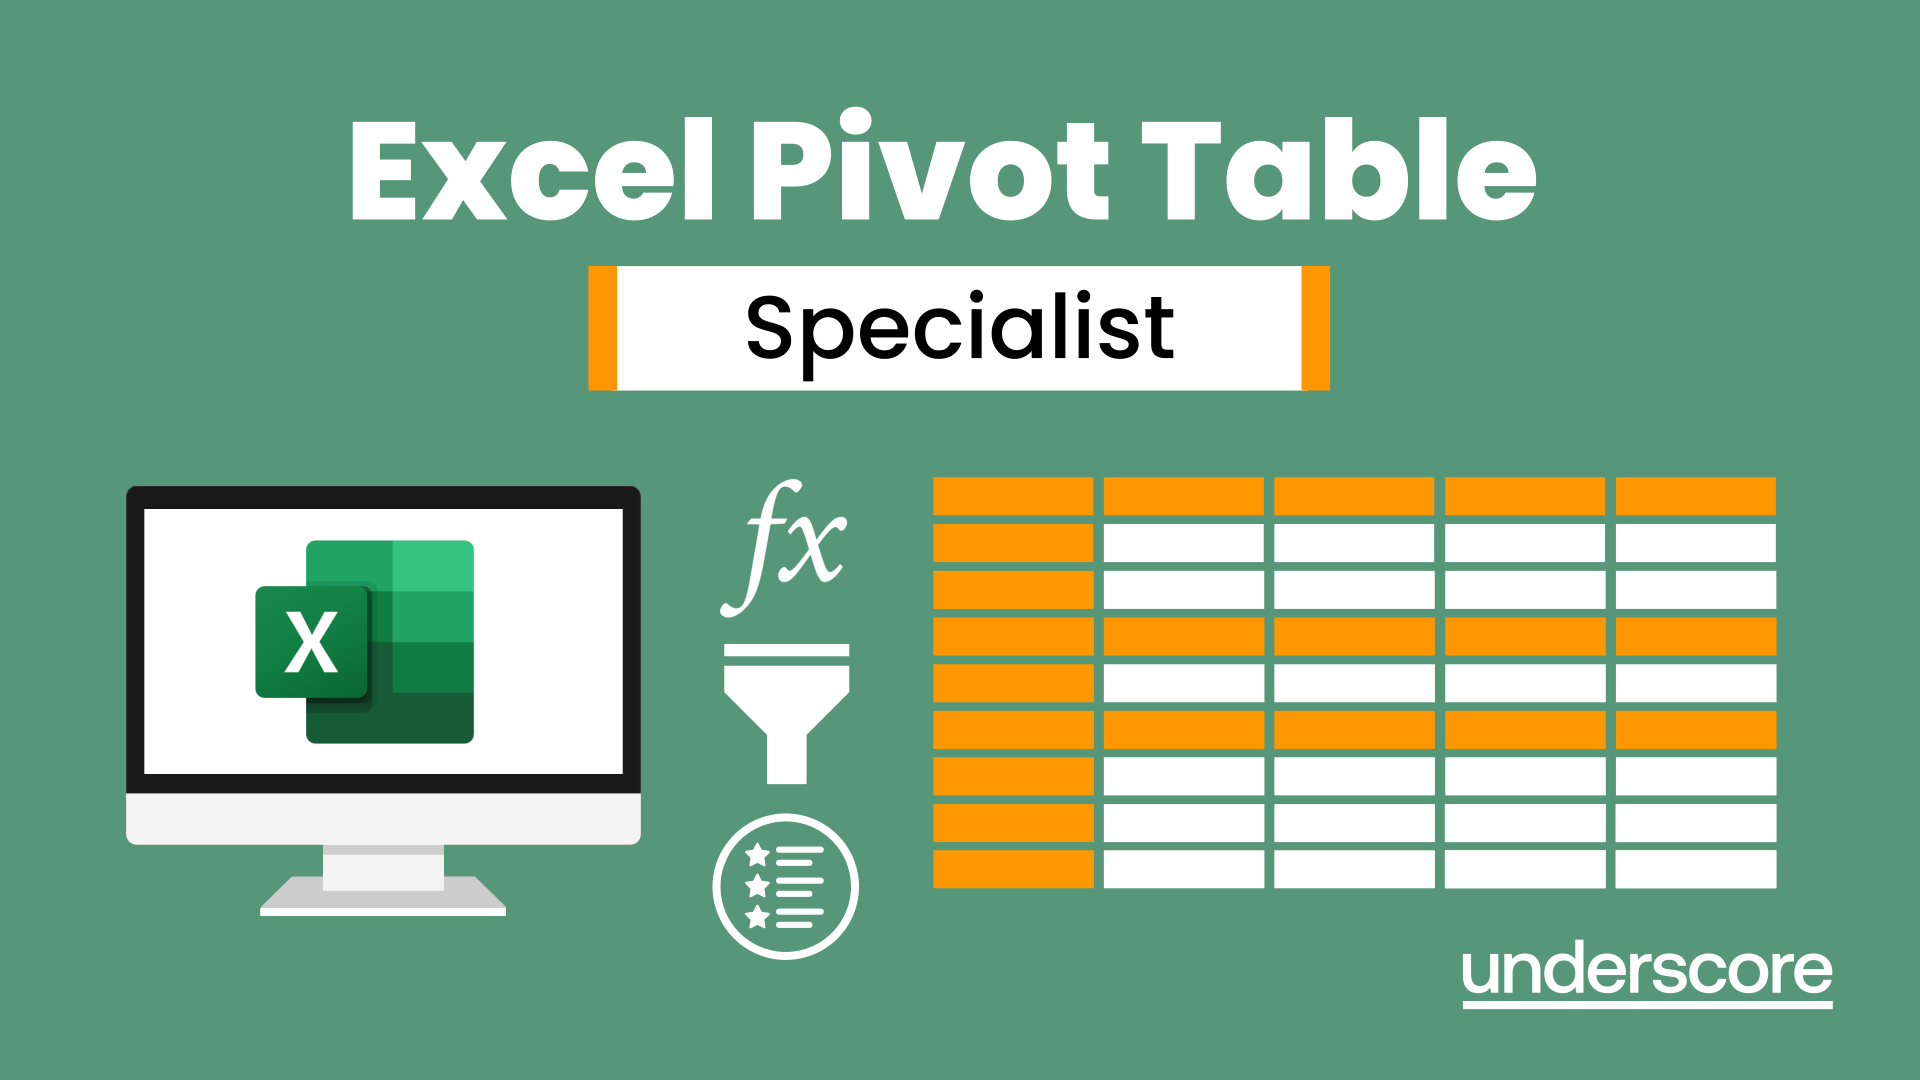 Excel - Pivot Table Specialist